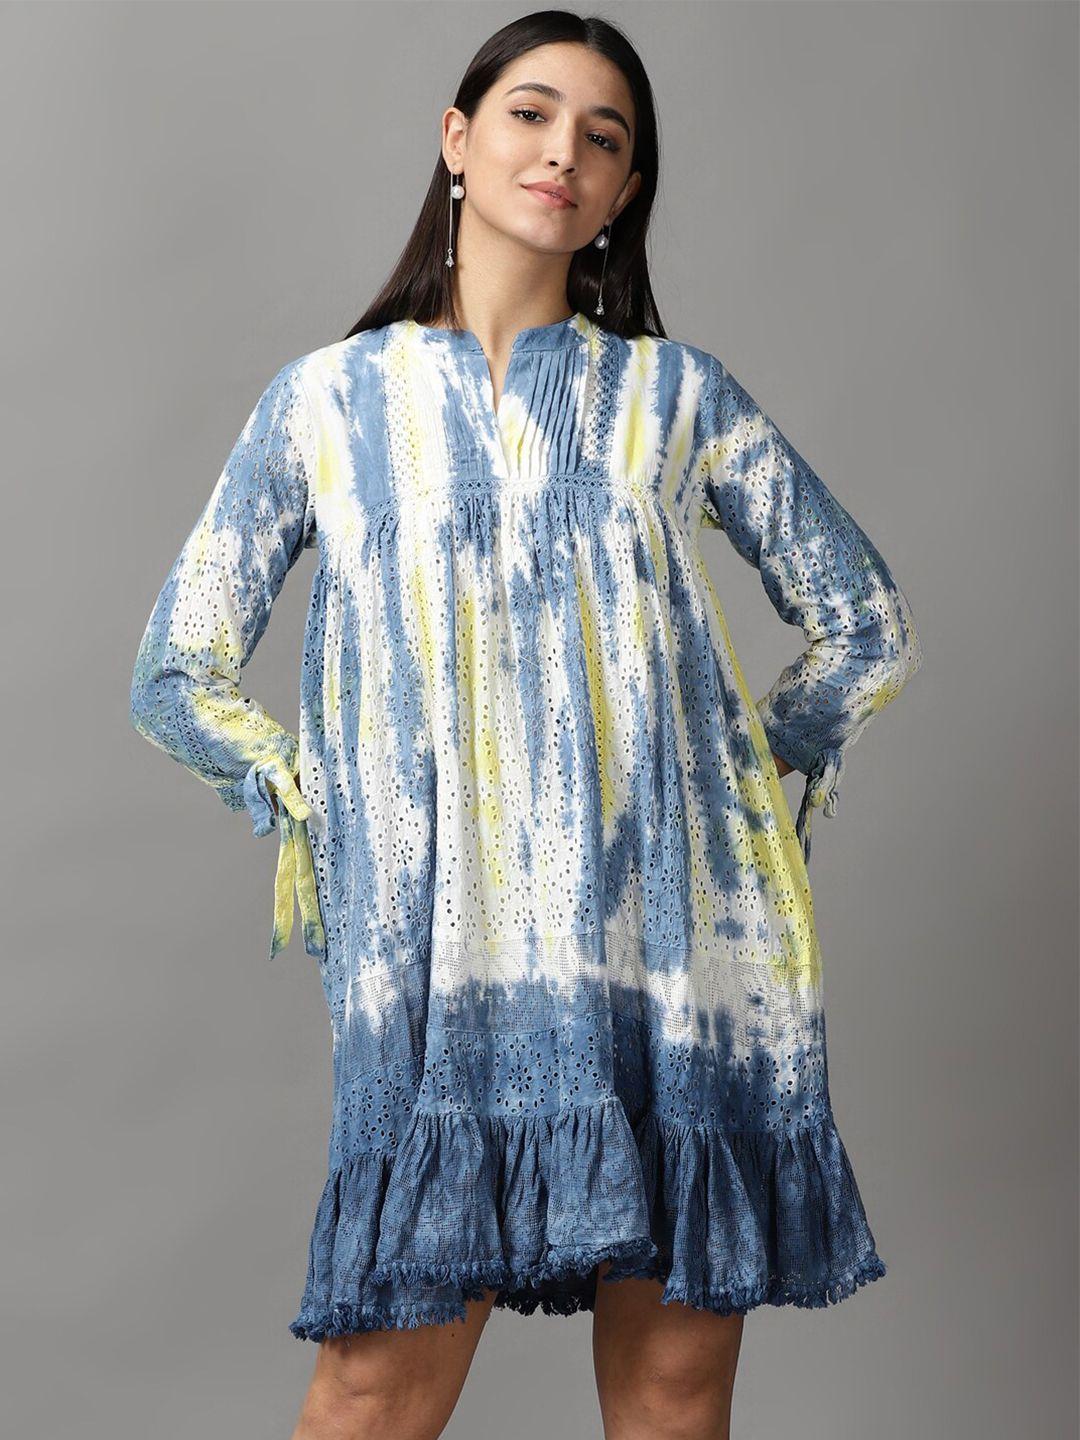 showoff-women-white-&-blue-tie-and-dye-a-line-cotton-dress